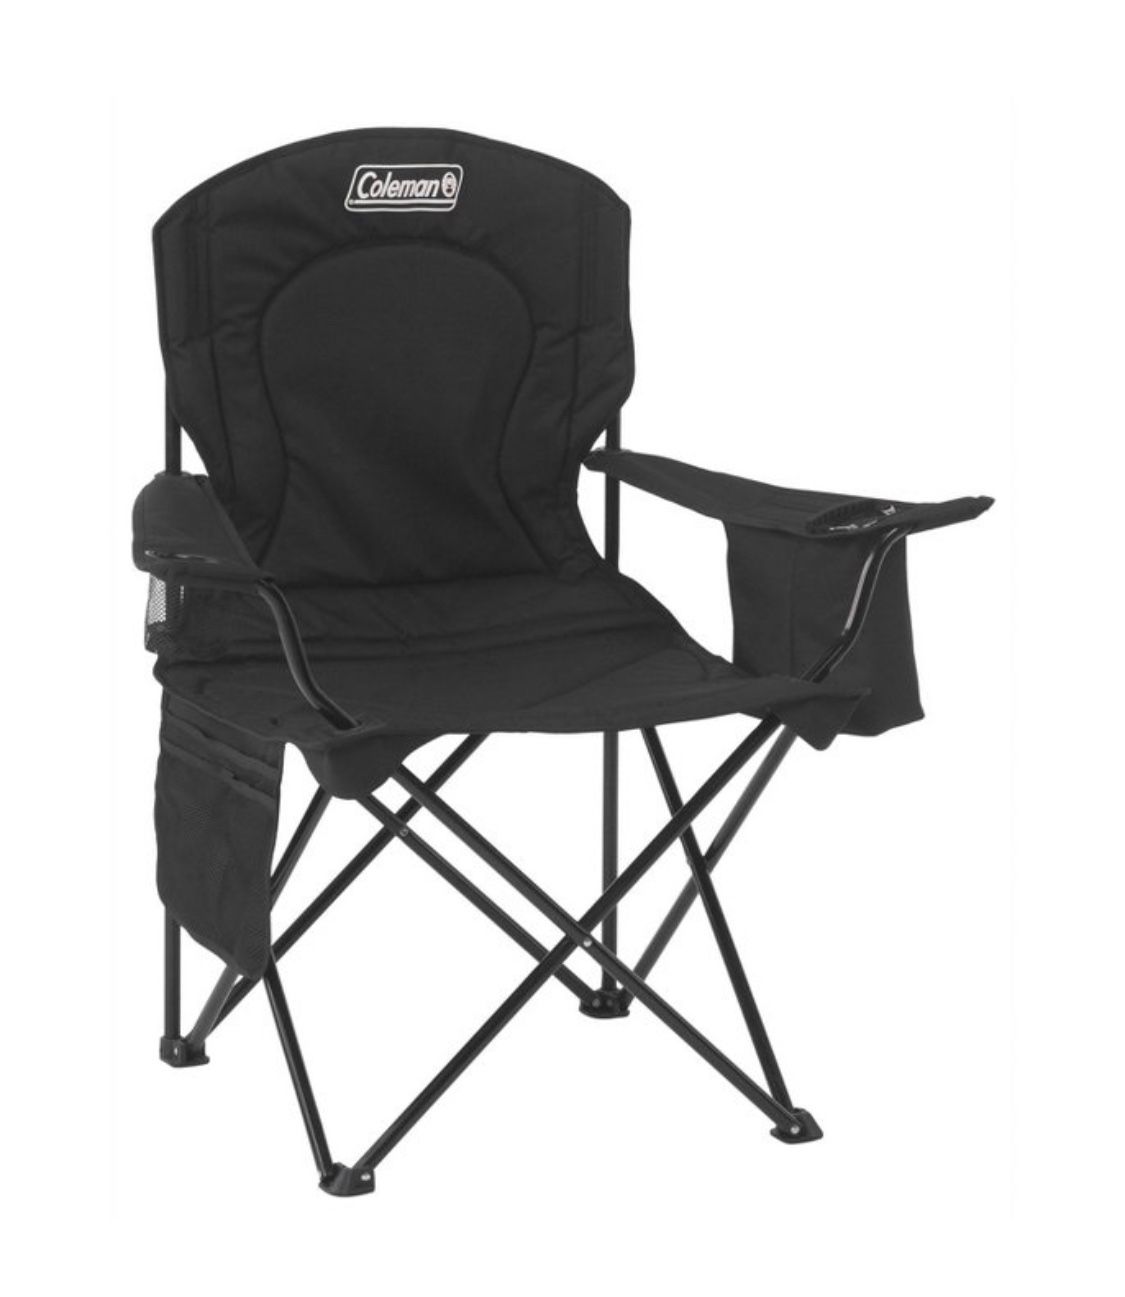 Coleman Quad Portable Camping Chair with Built-In Cooler - Black